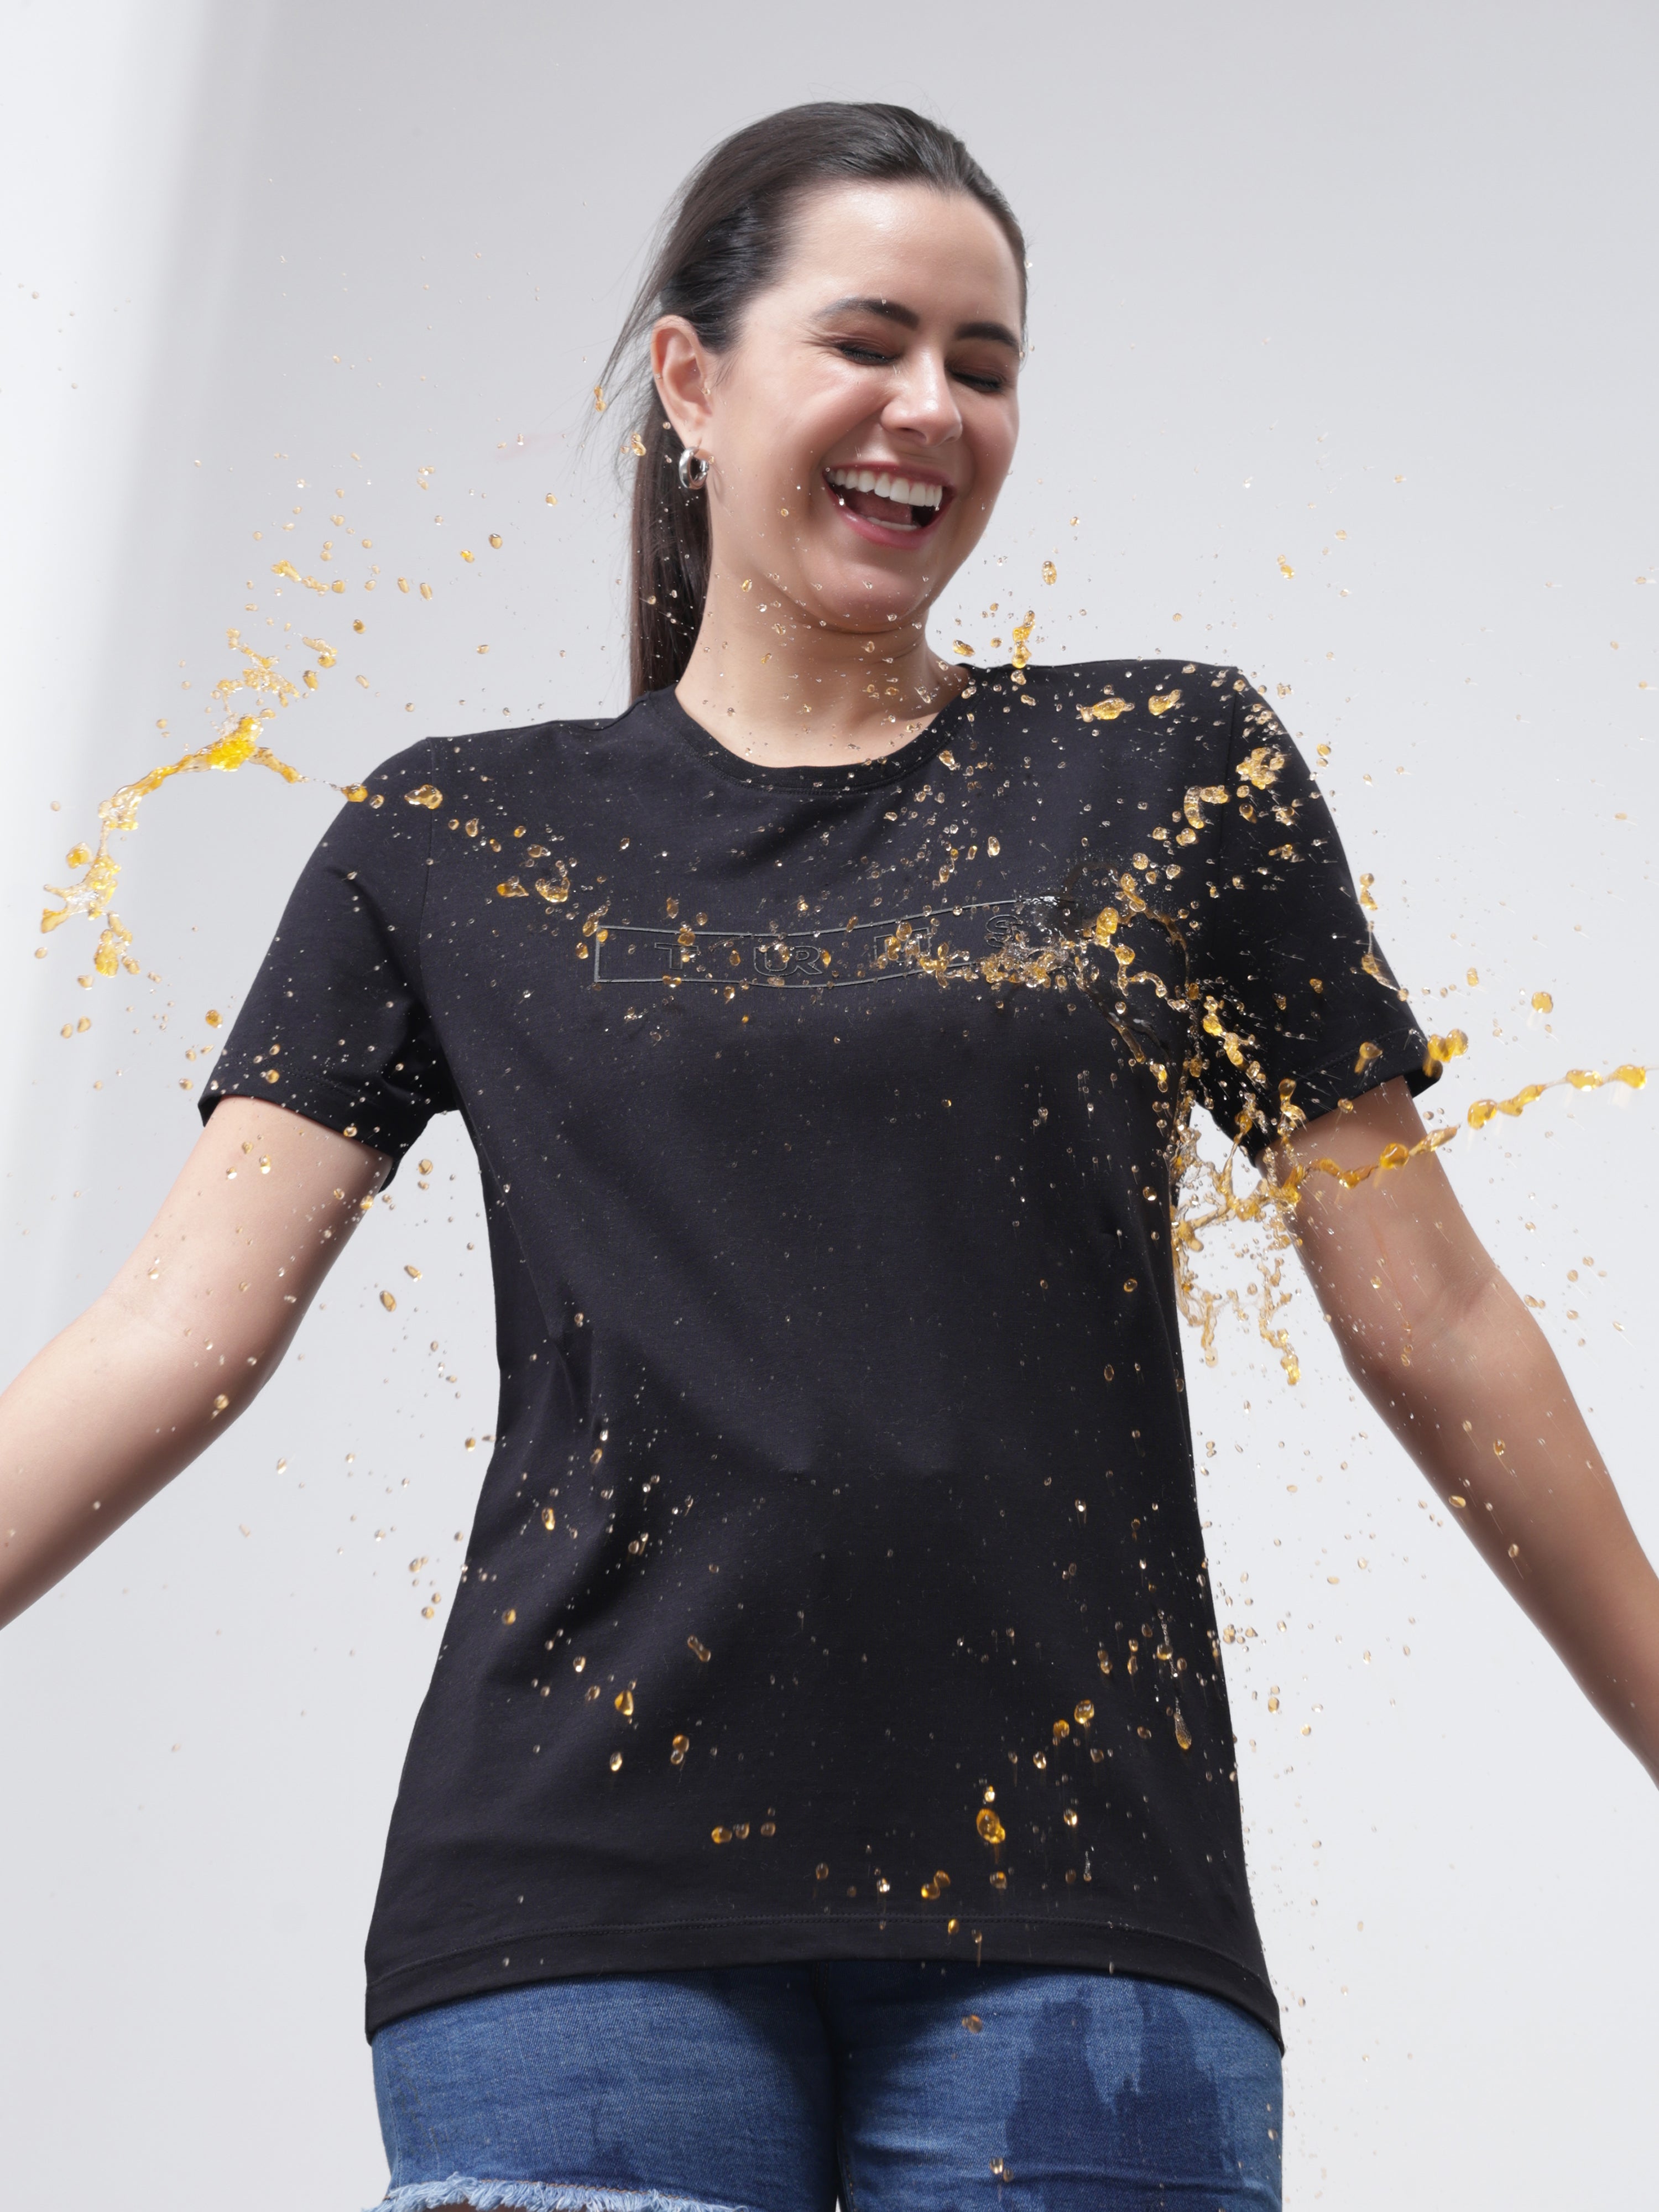 Woman wearing Turms Midnight Elegance T-shirt demonstrating anti-stain and anti-odor properties with liquid spill, showcasing stain-proof technology.